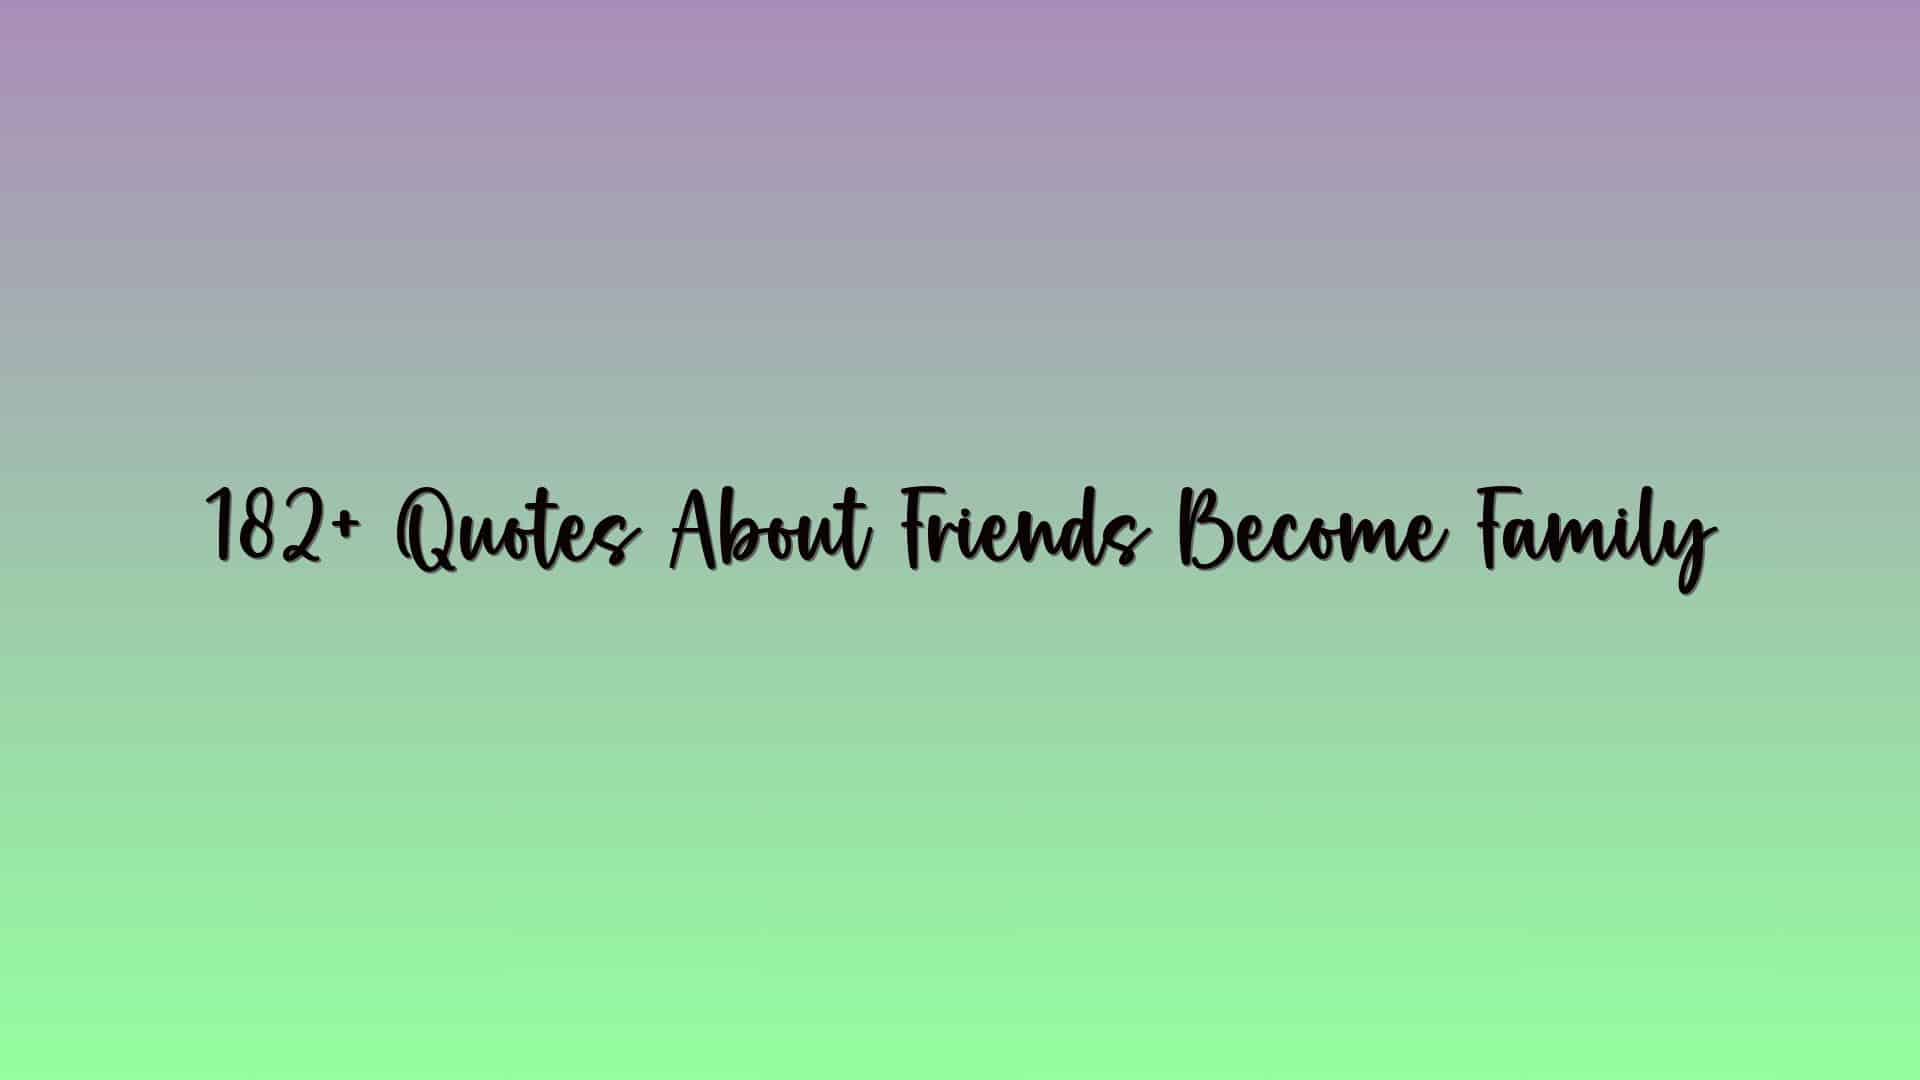 182+ Quotes About Friends Become Family